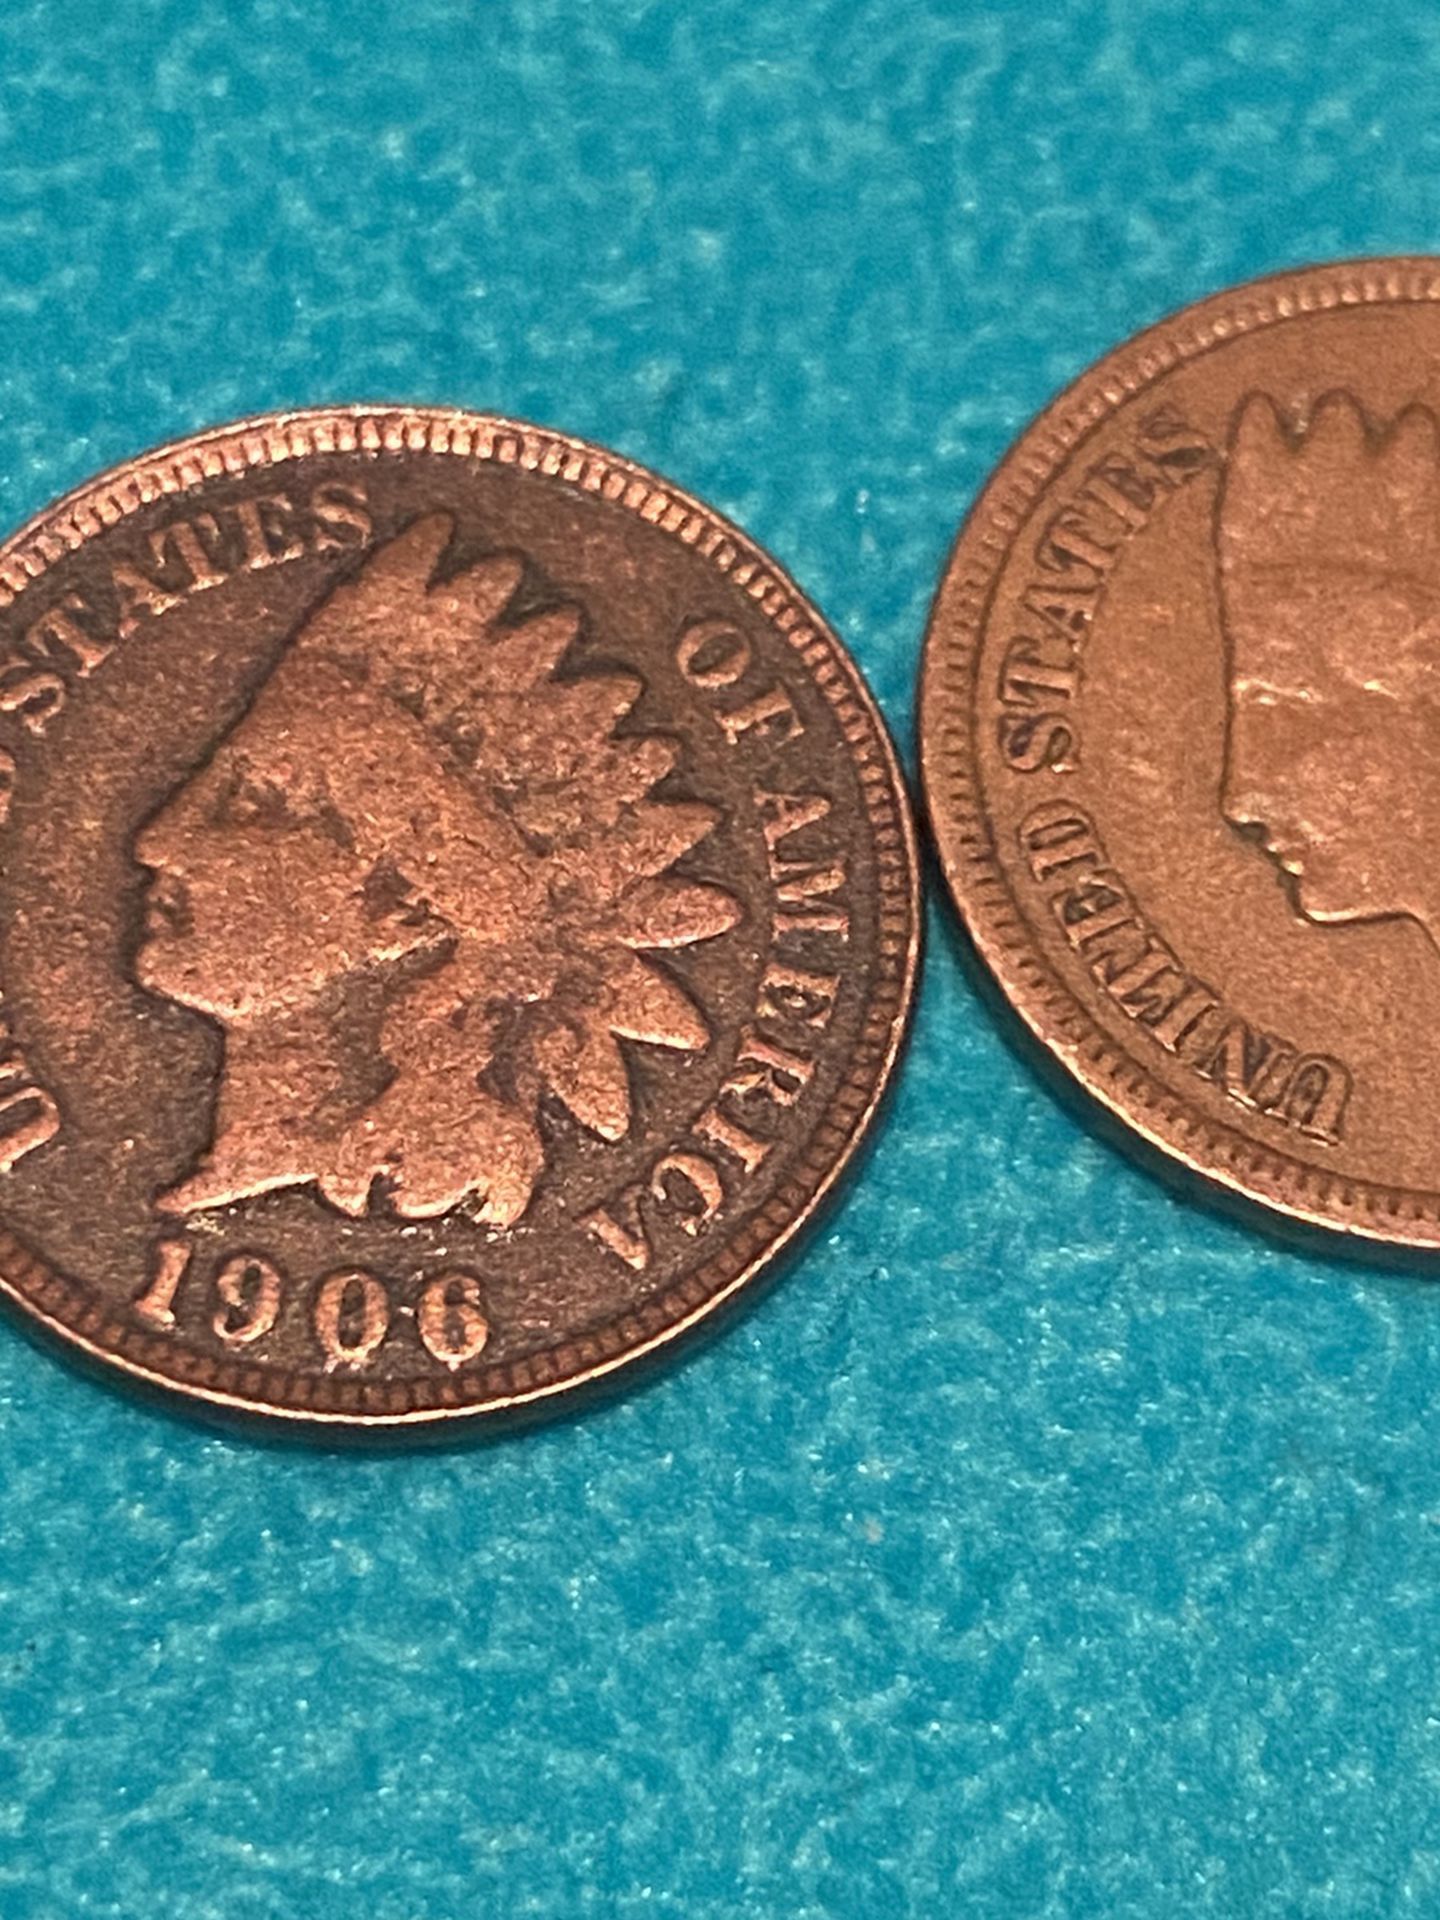 1906 Indian Head Cents